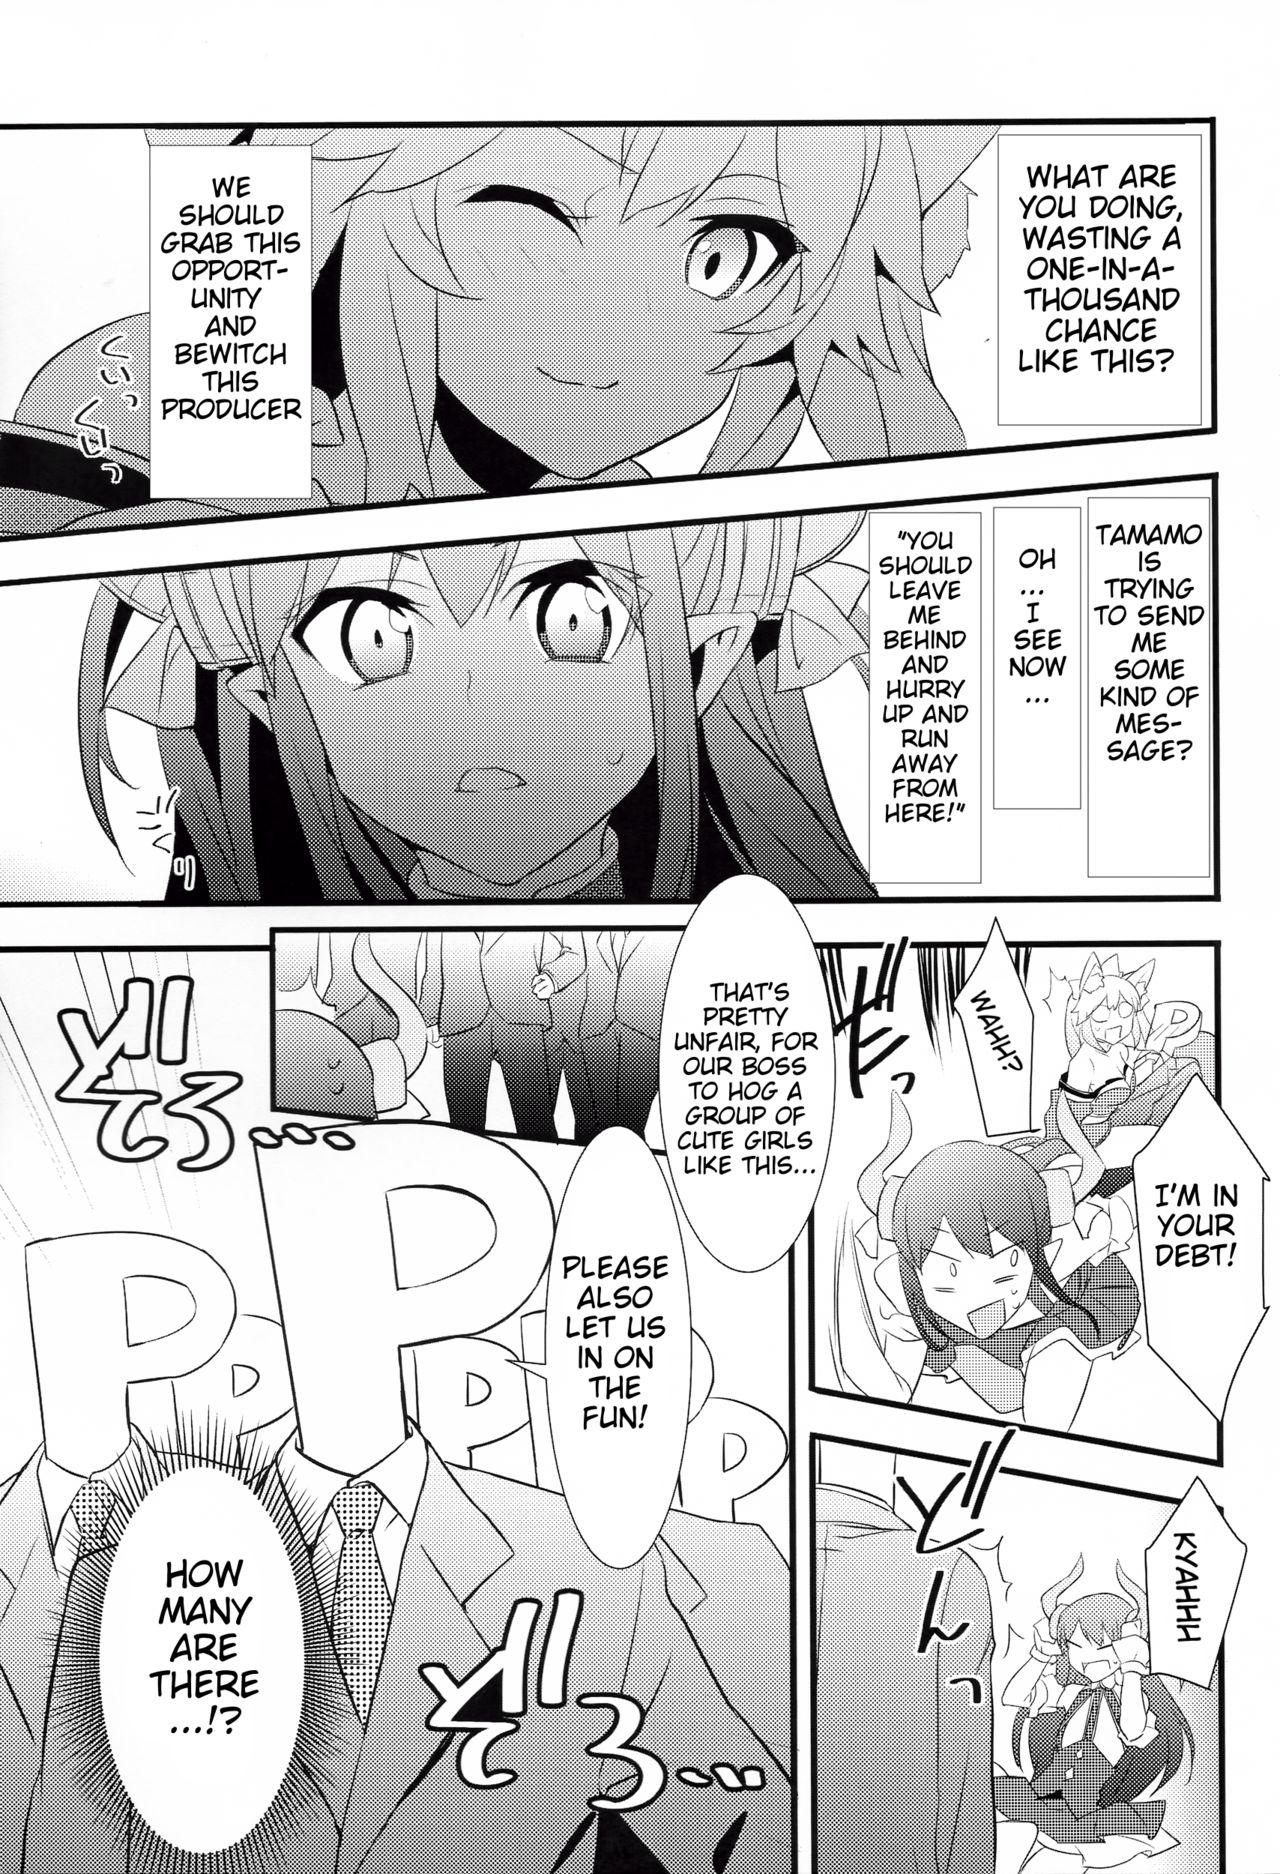 Blowing The IDOL SERVANT - Fate grand order Guys - Page 9